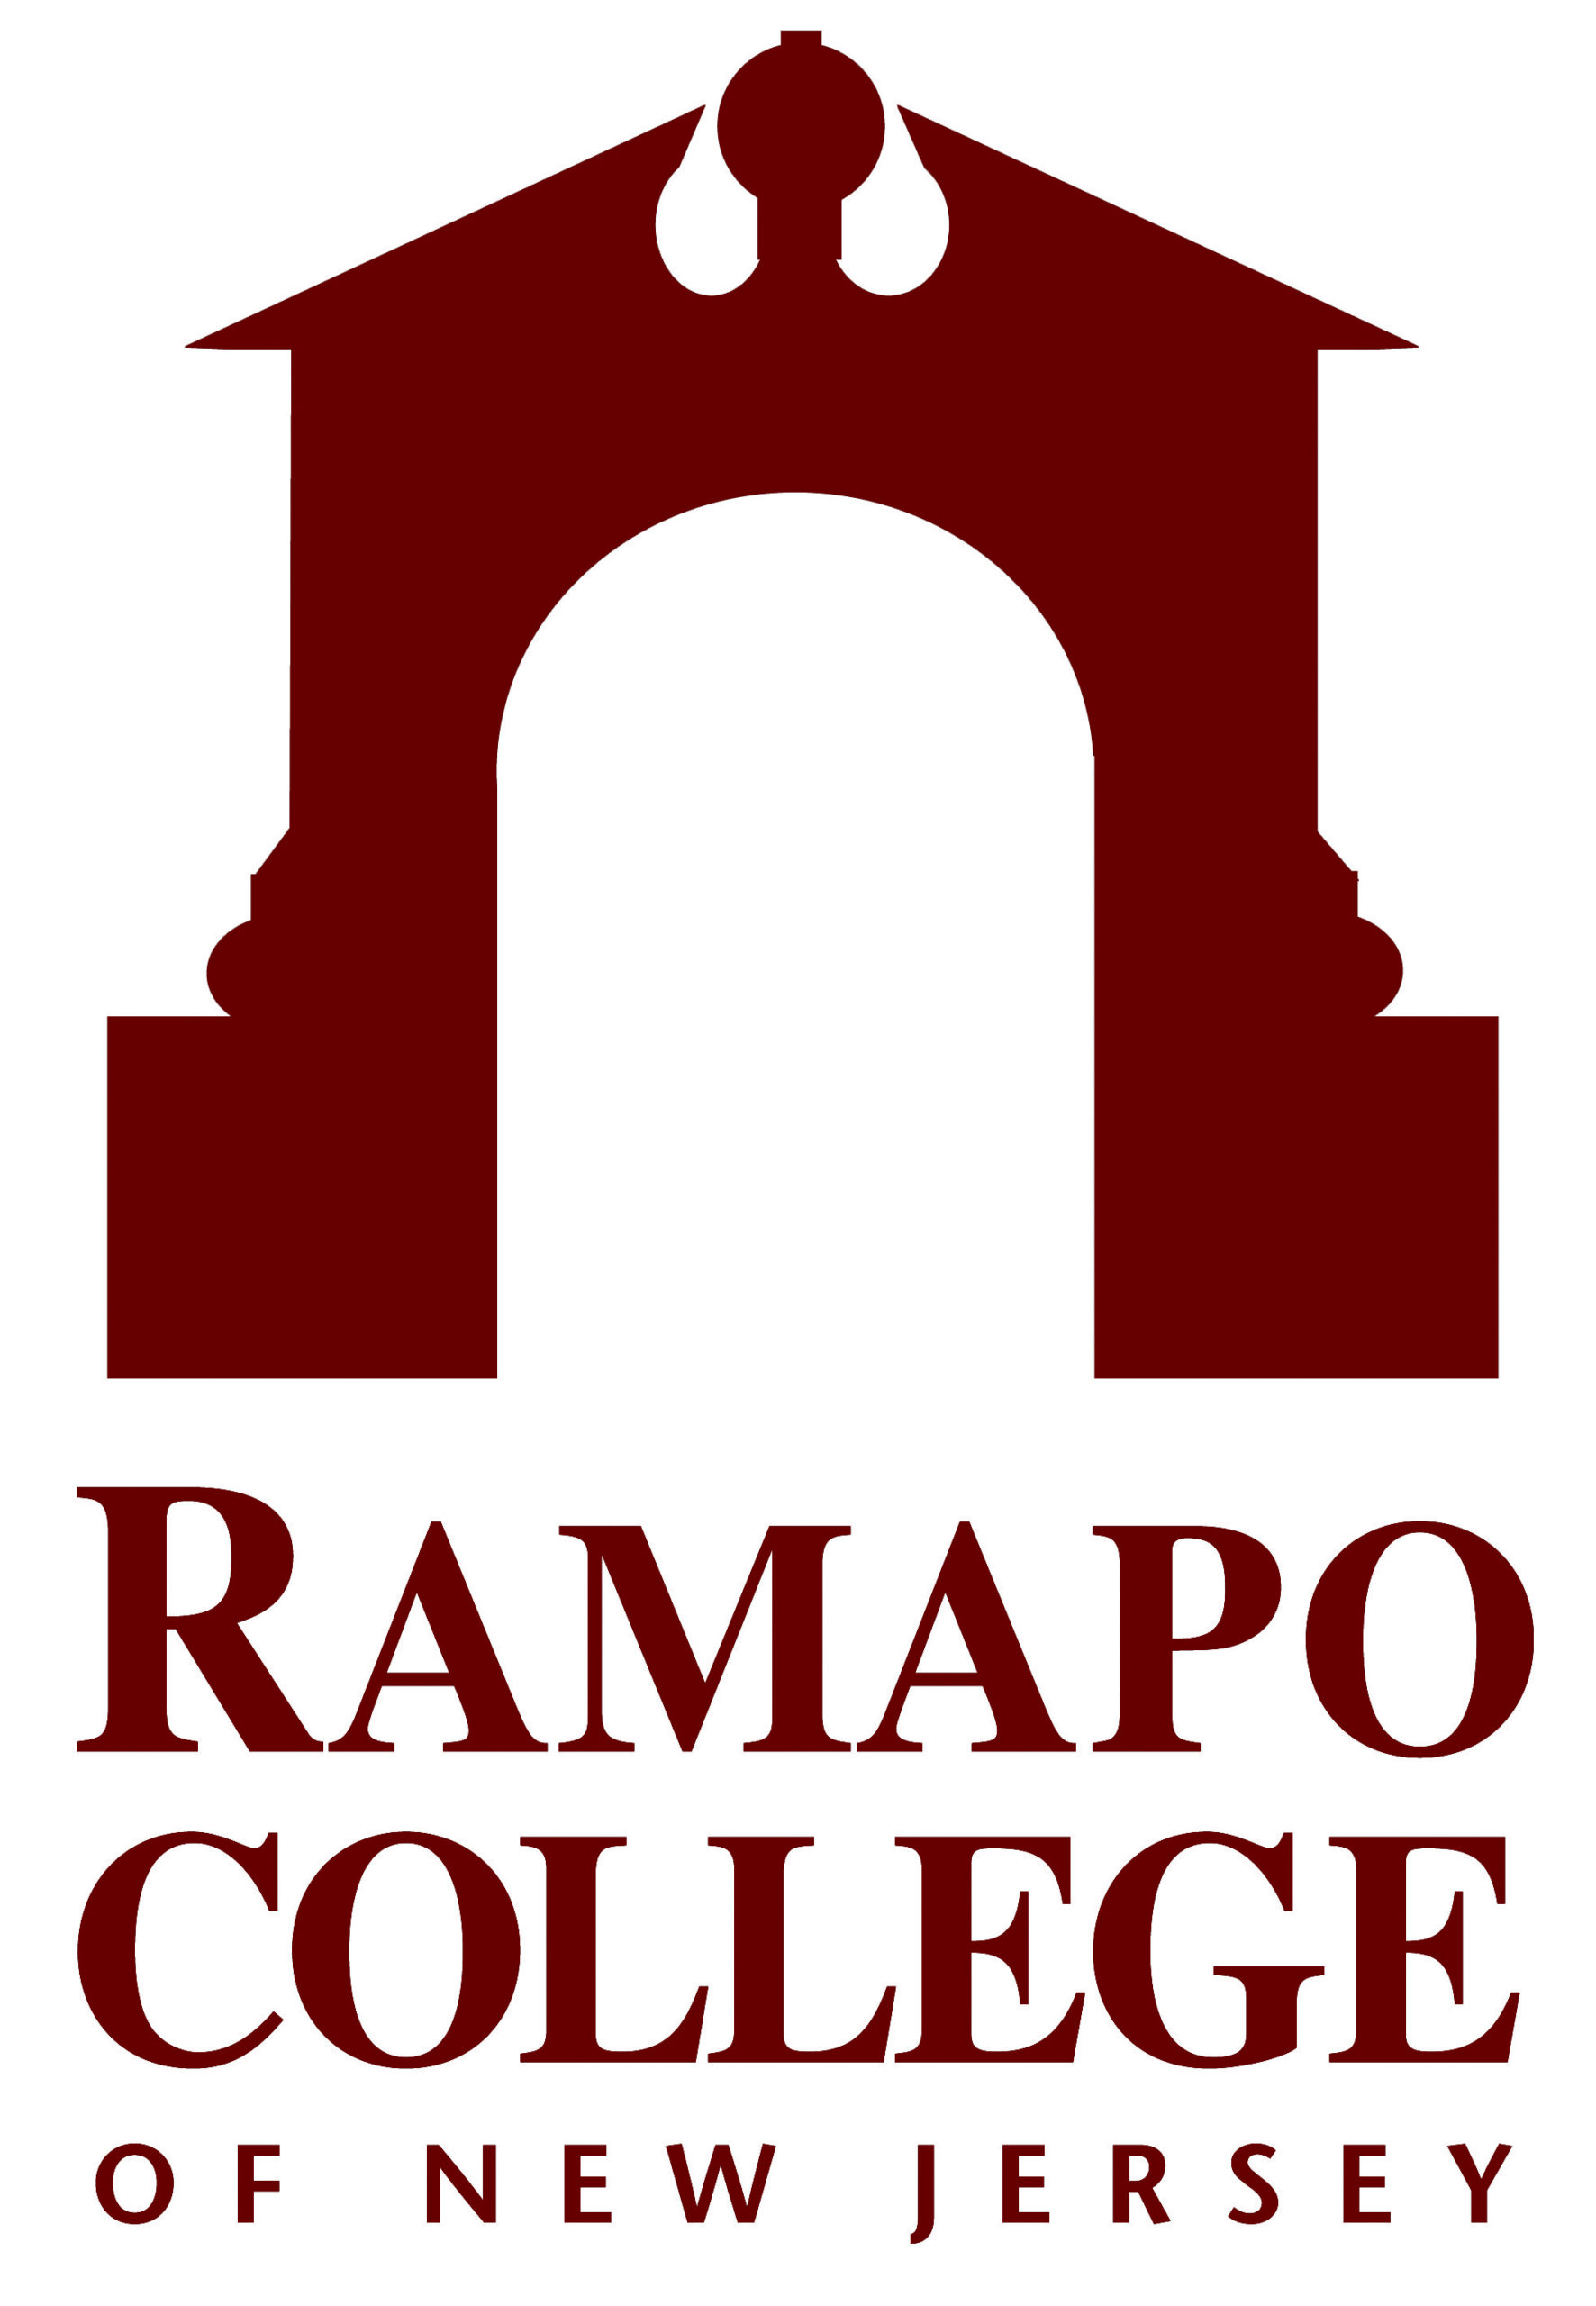 Ramapo State College of New Jersey